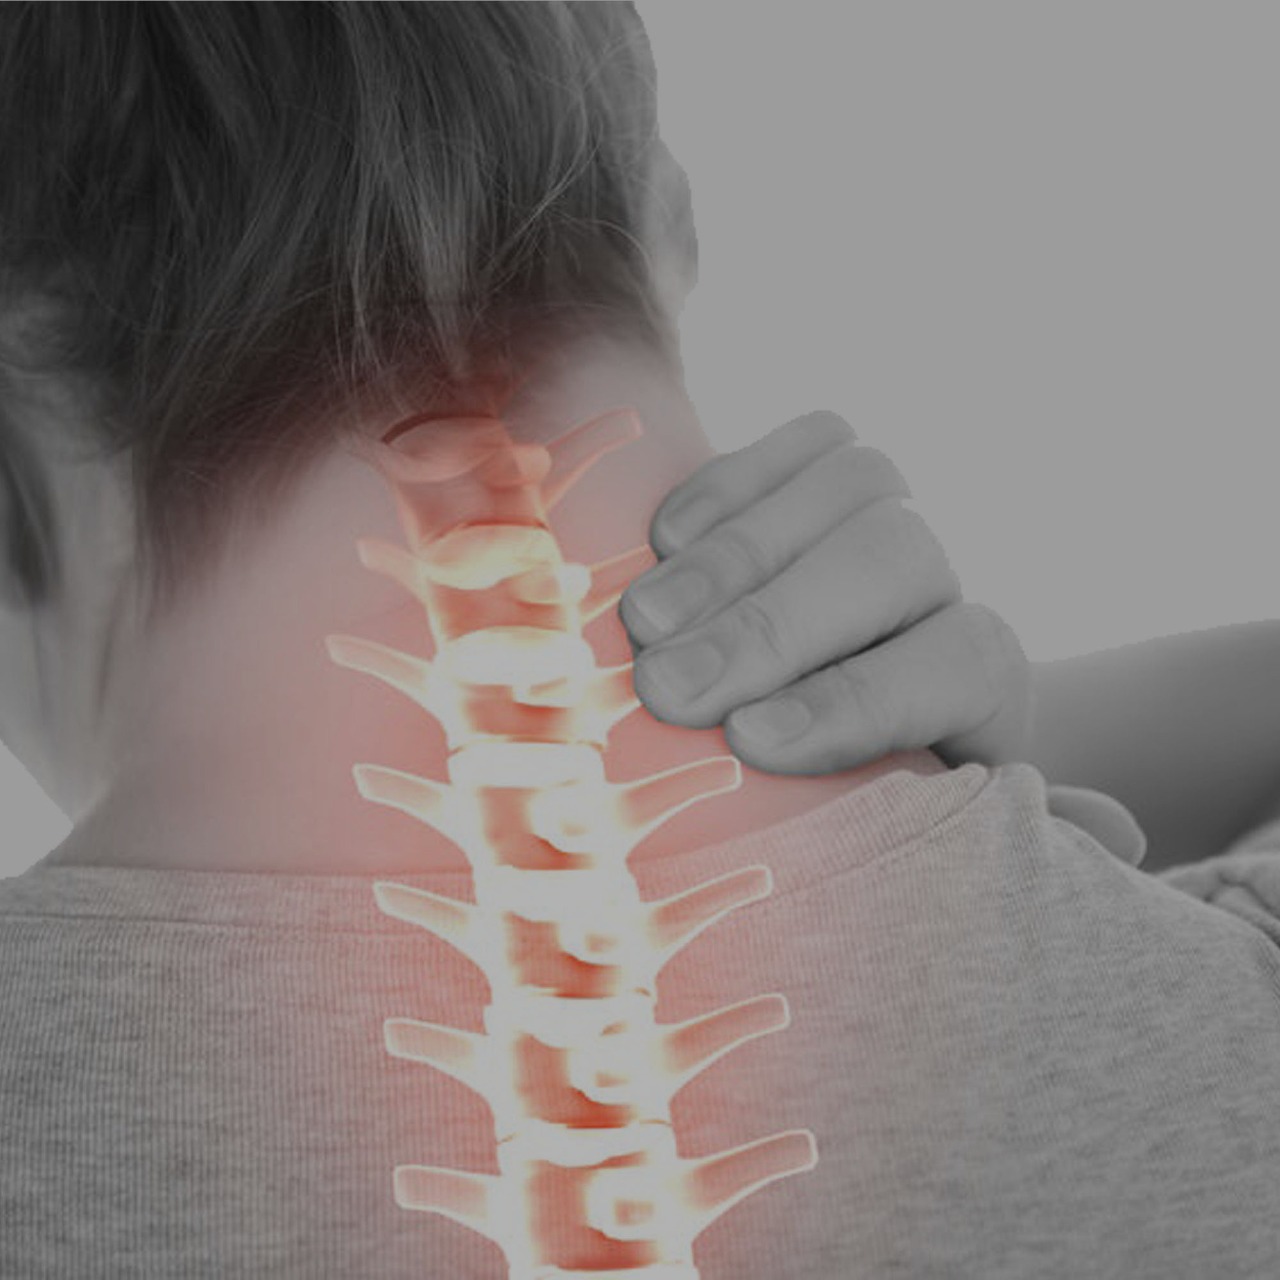 Cervical Spine Specialist in Pune and Pimpri Chinchwad.